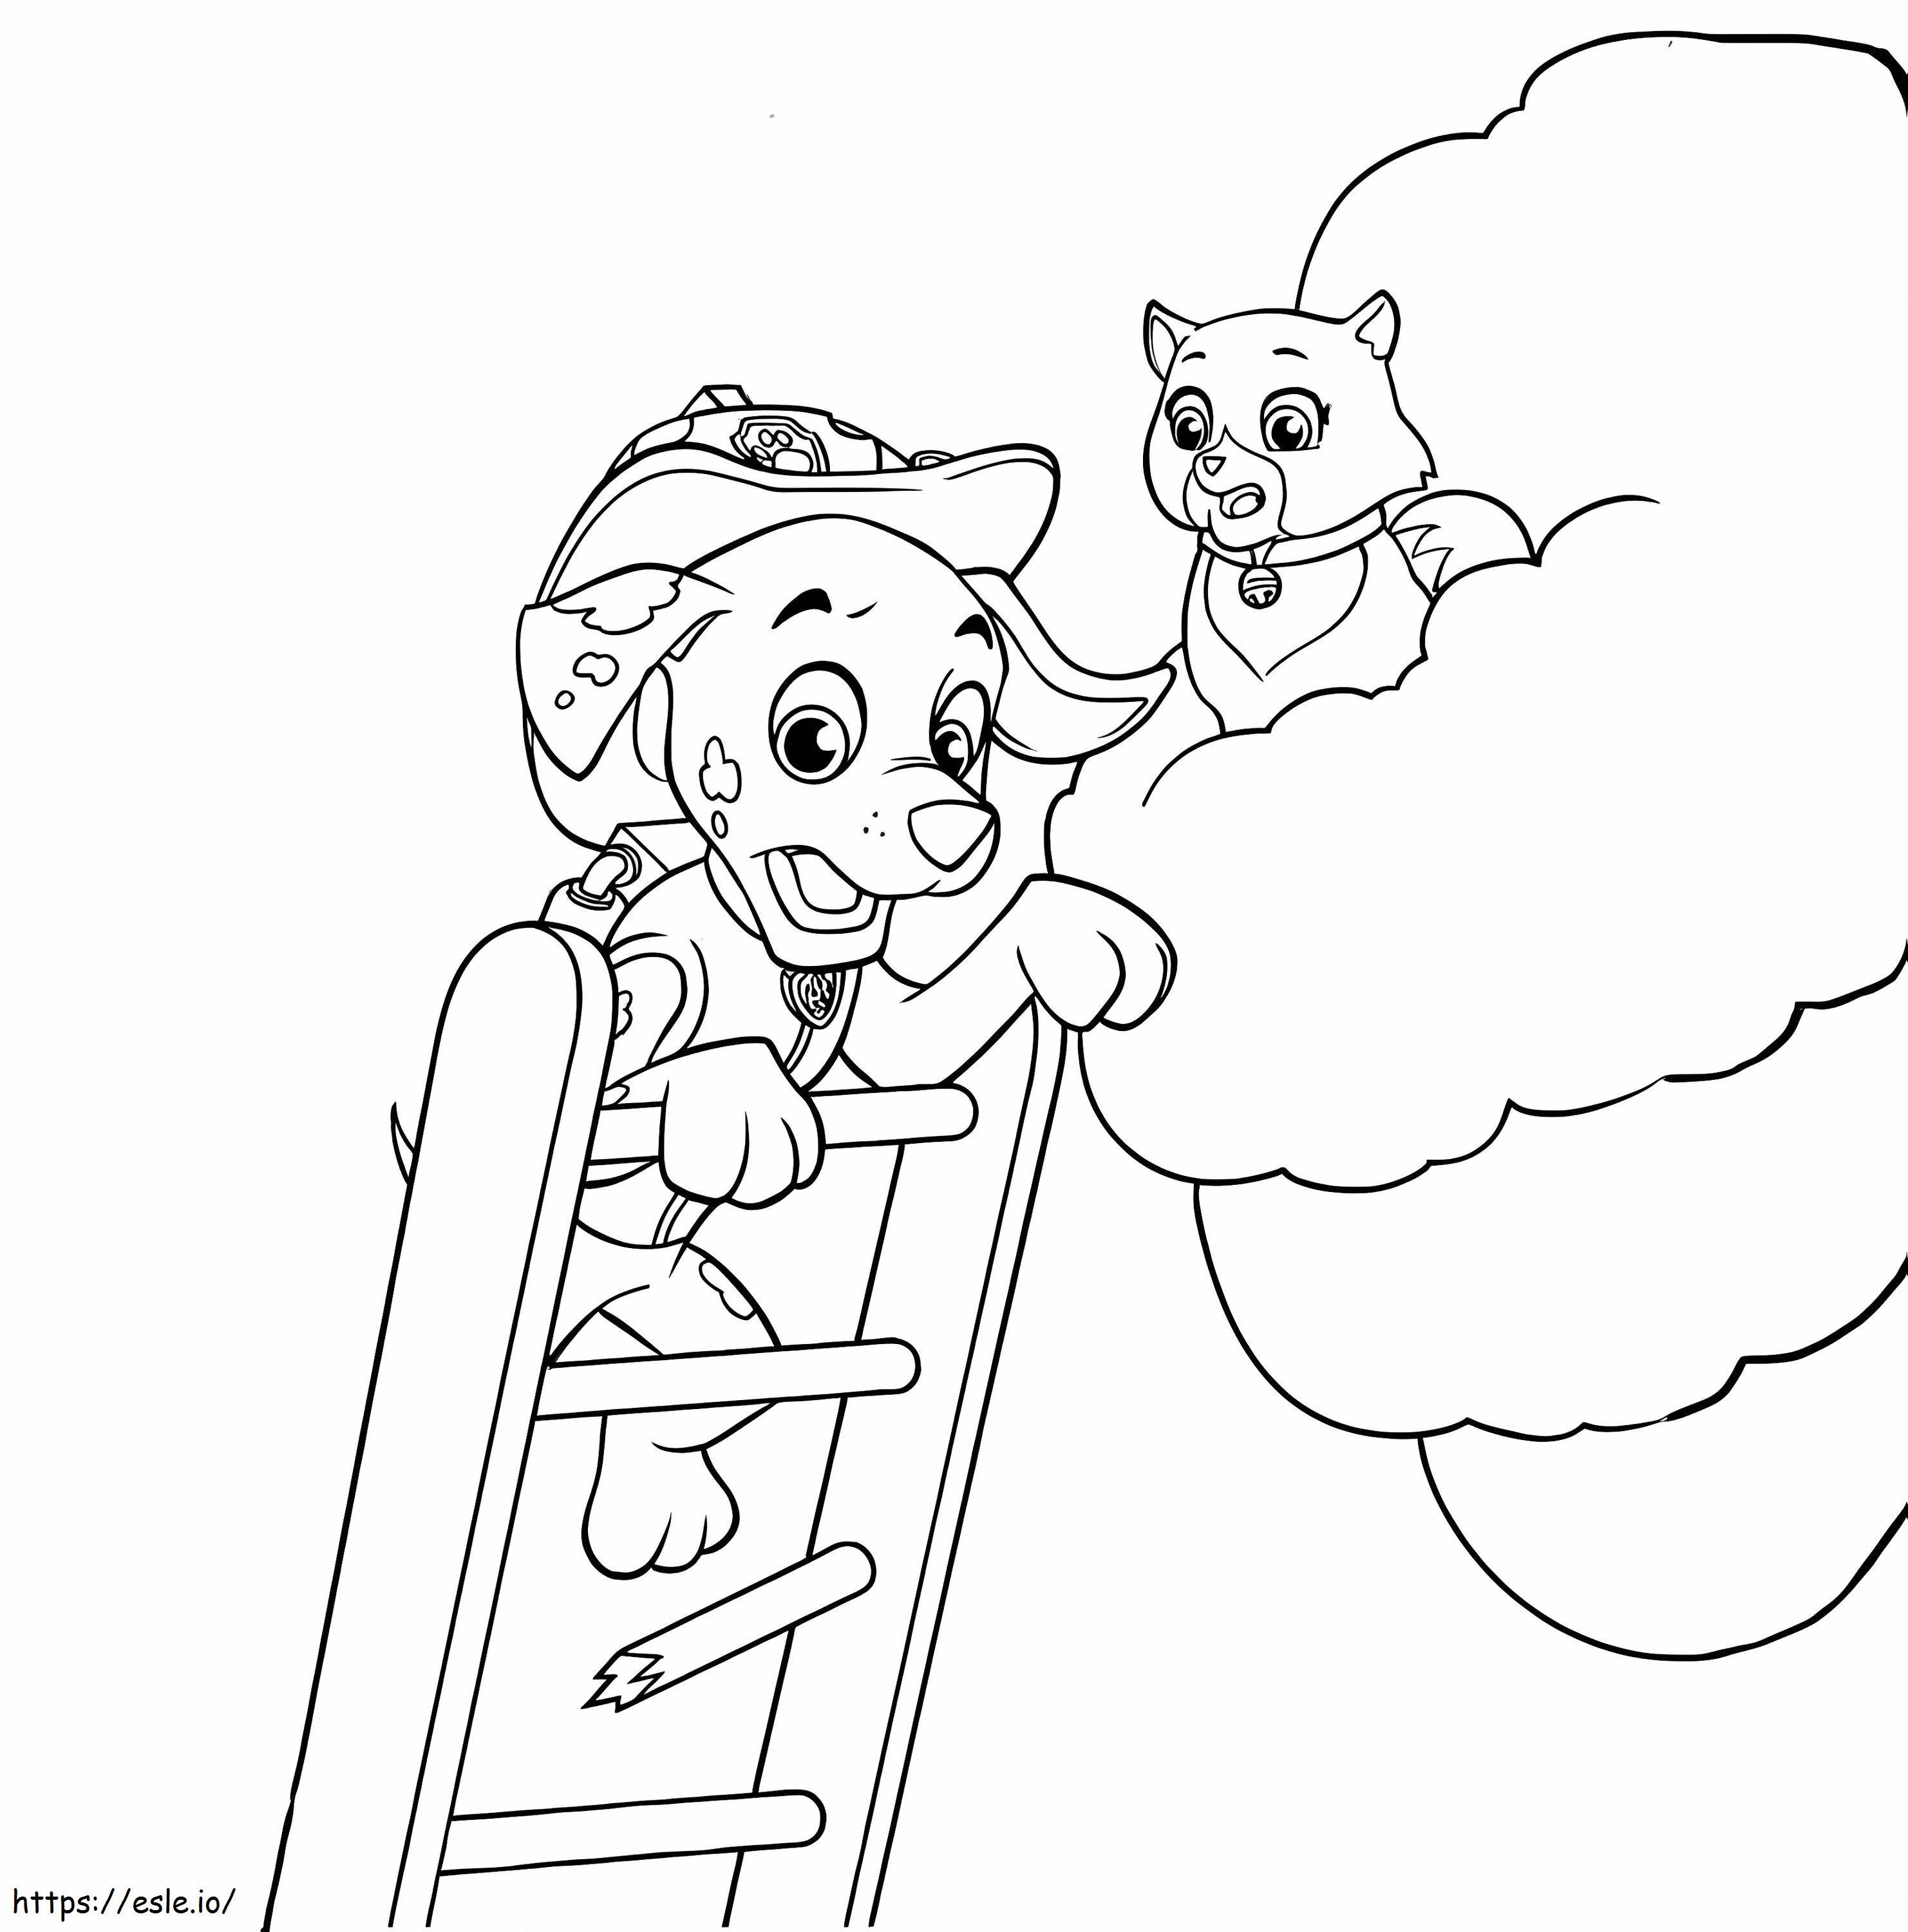 Marshall Stairs coloring page